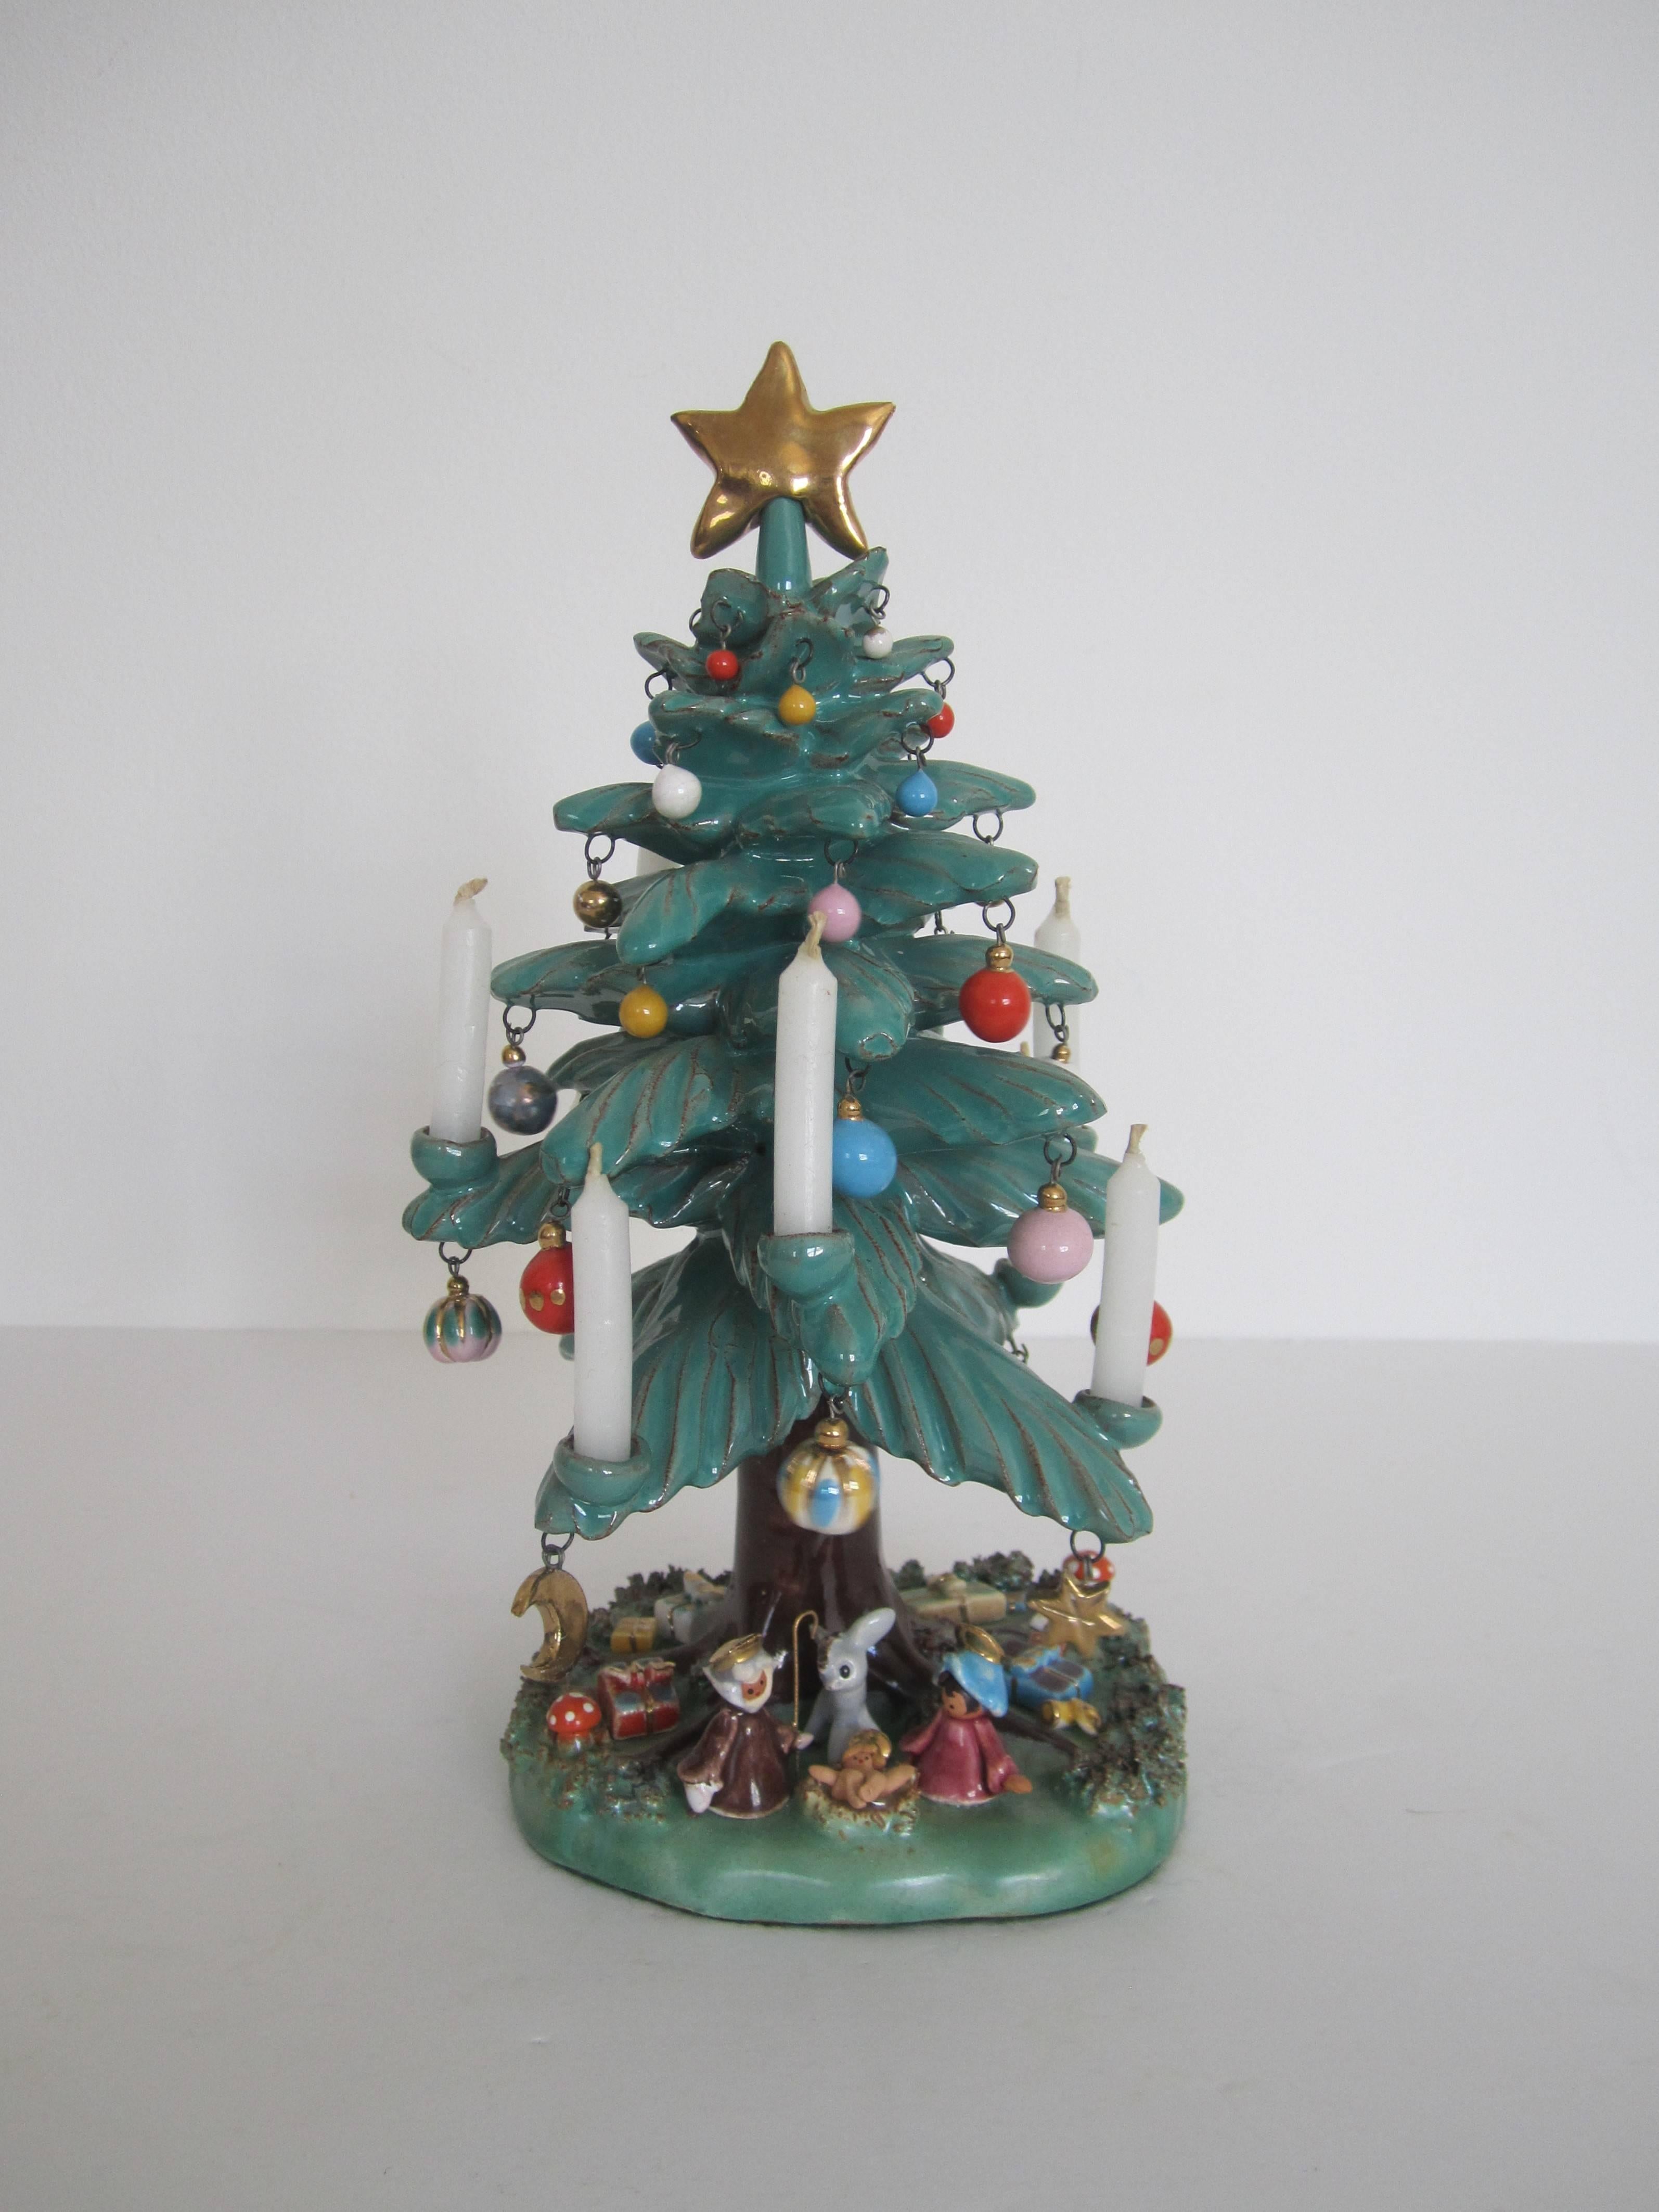 A stunning vintage Mexican pottery Christmas tree sculpture with nativity scene. Christmas tree has eight candleholders around tree that hold small birthday size candles, many gold and colorful detailed dangling Christmas ornaments, large gold star